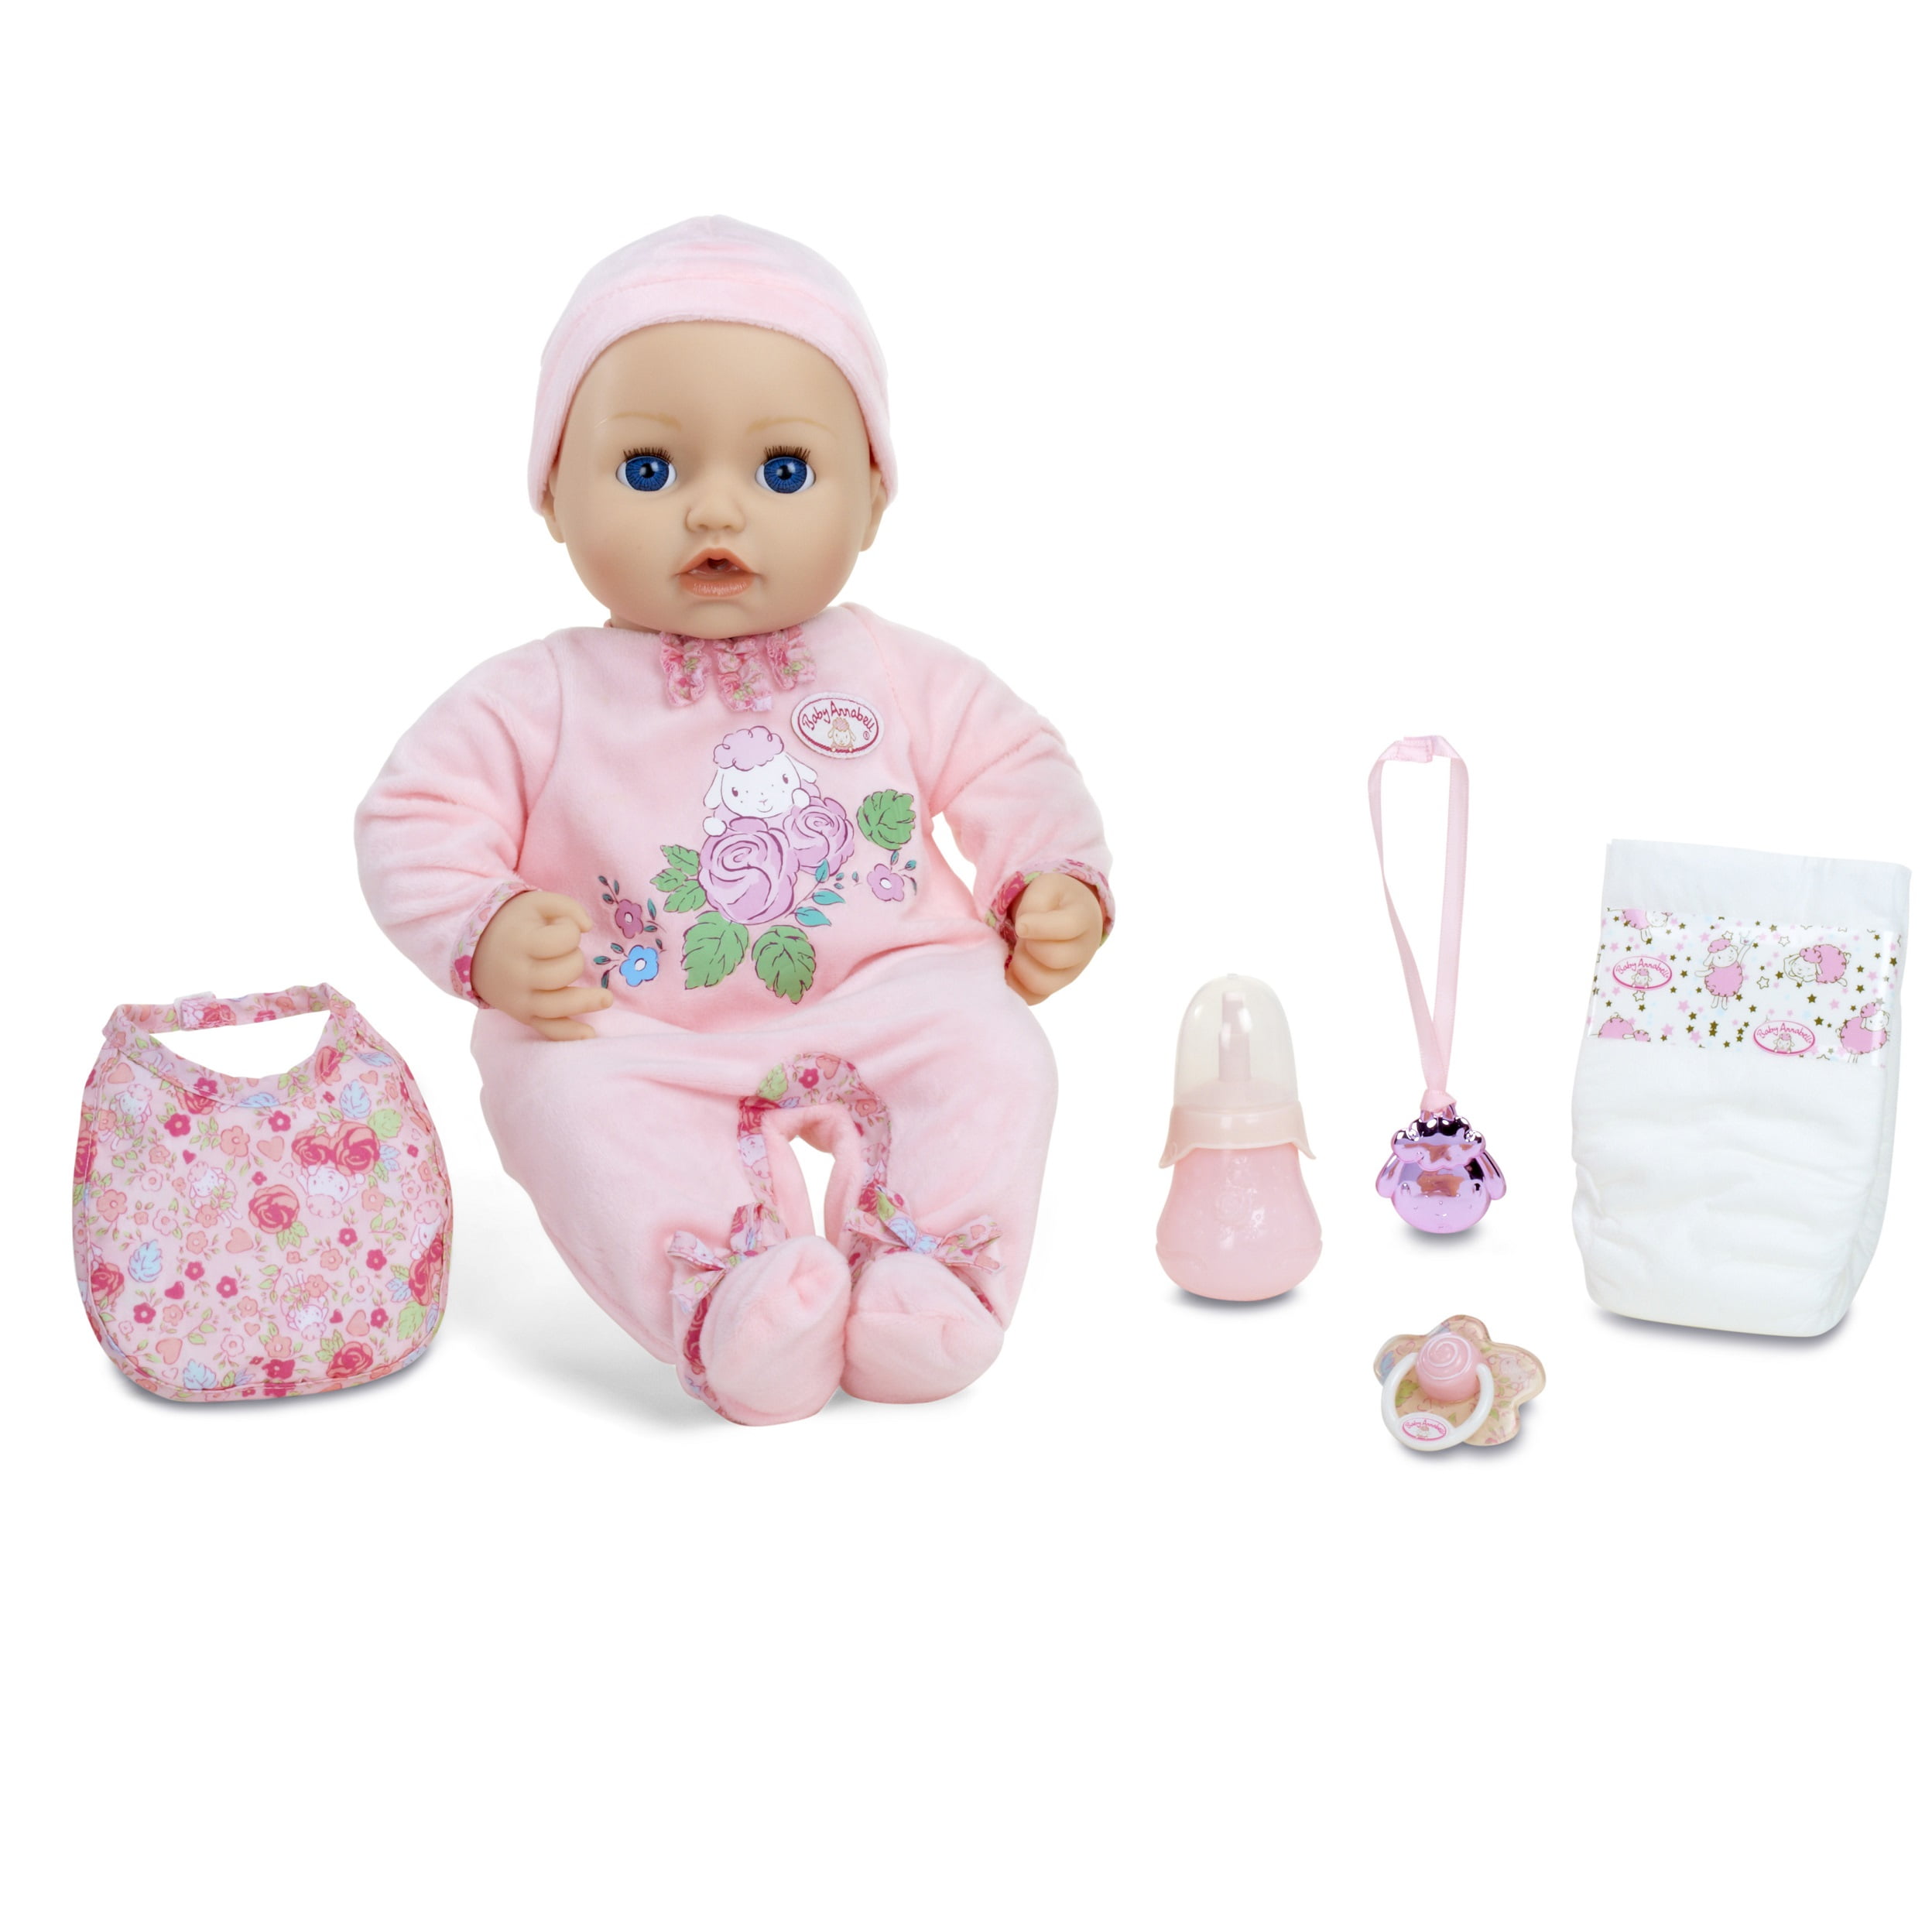 ~~ NEW ~~ BABY GIRL DOLL 10" INCHES FRUIT SCENTED BLUE EYES 6 SOUNDS TALKING TOY 